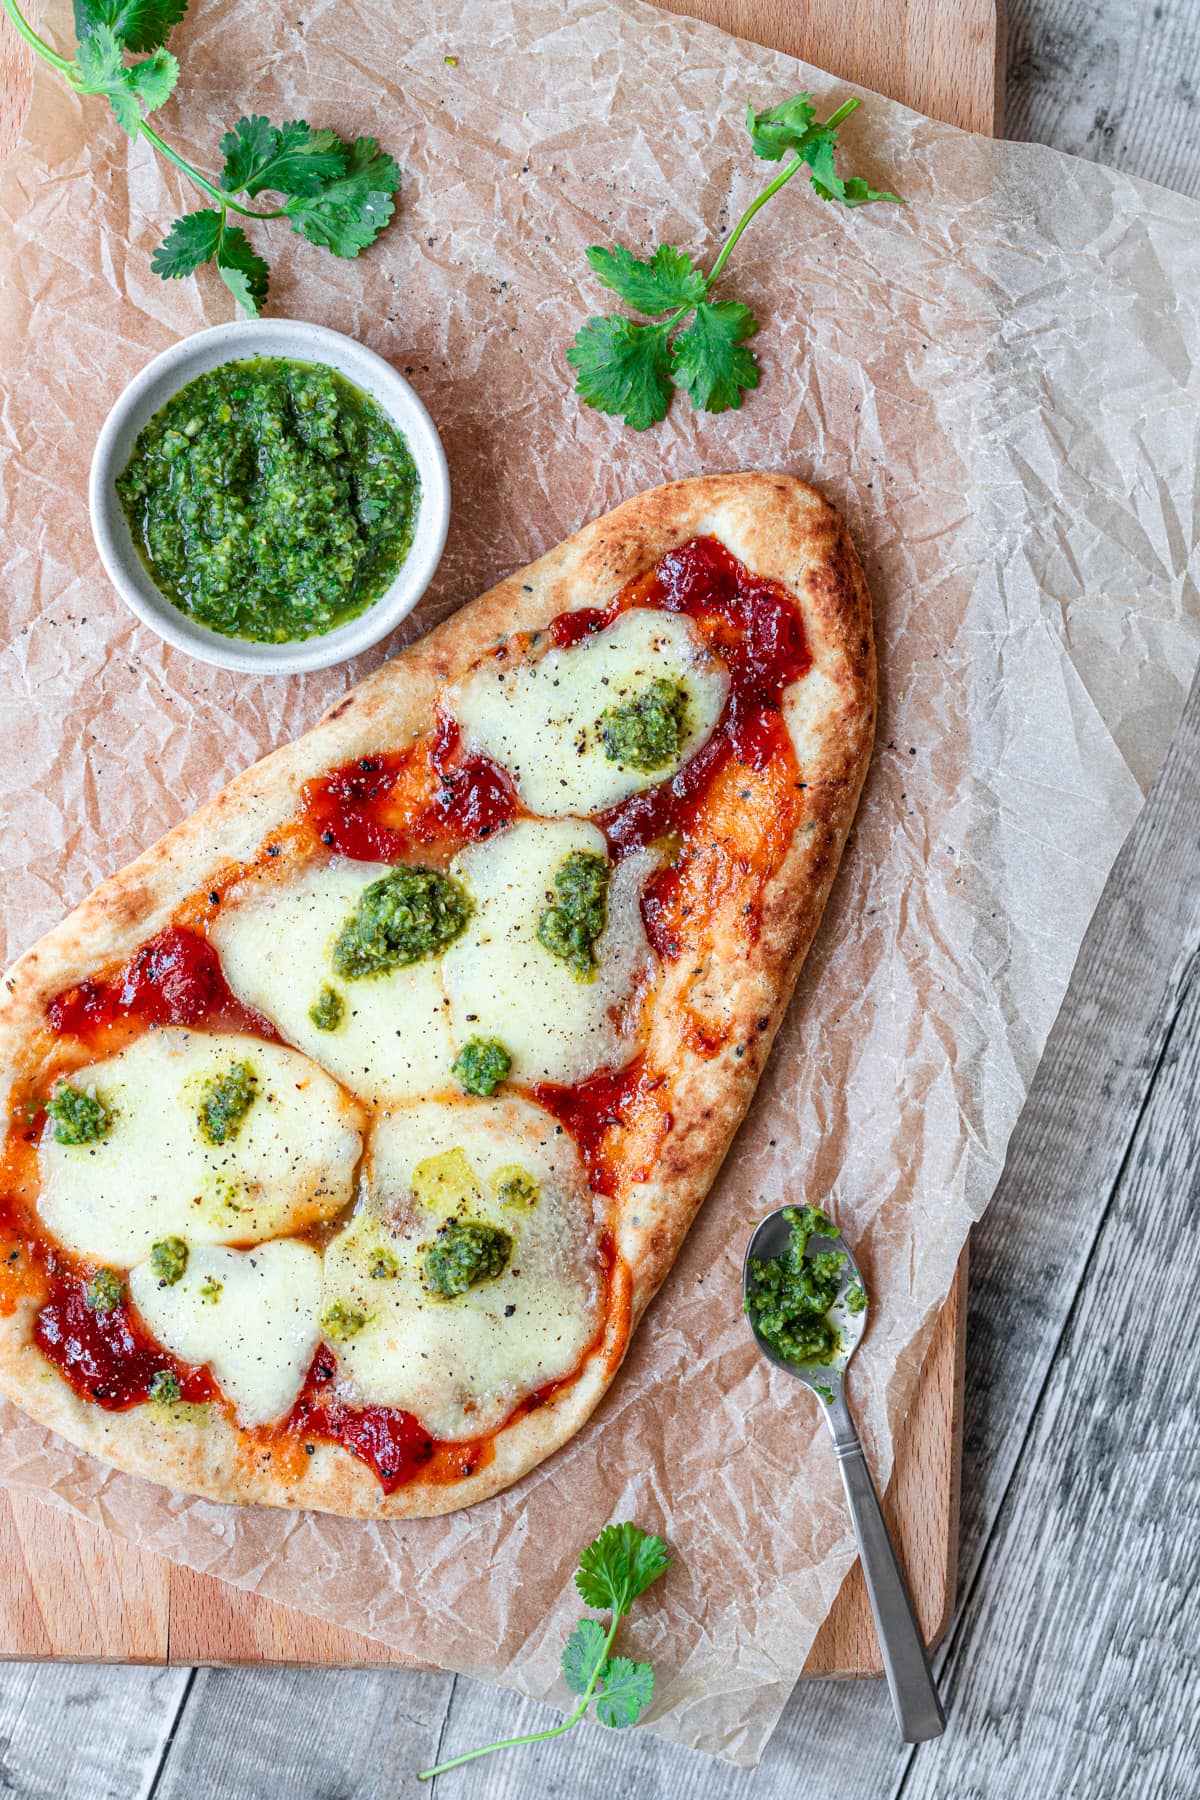 Naan bread pizza with coriander chutney drizzle